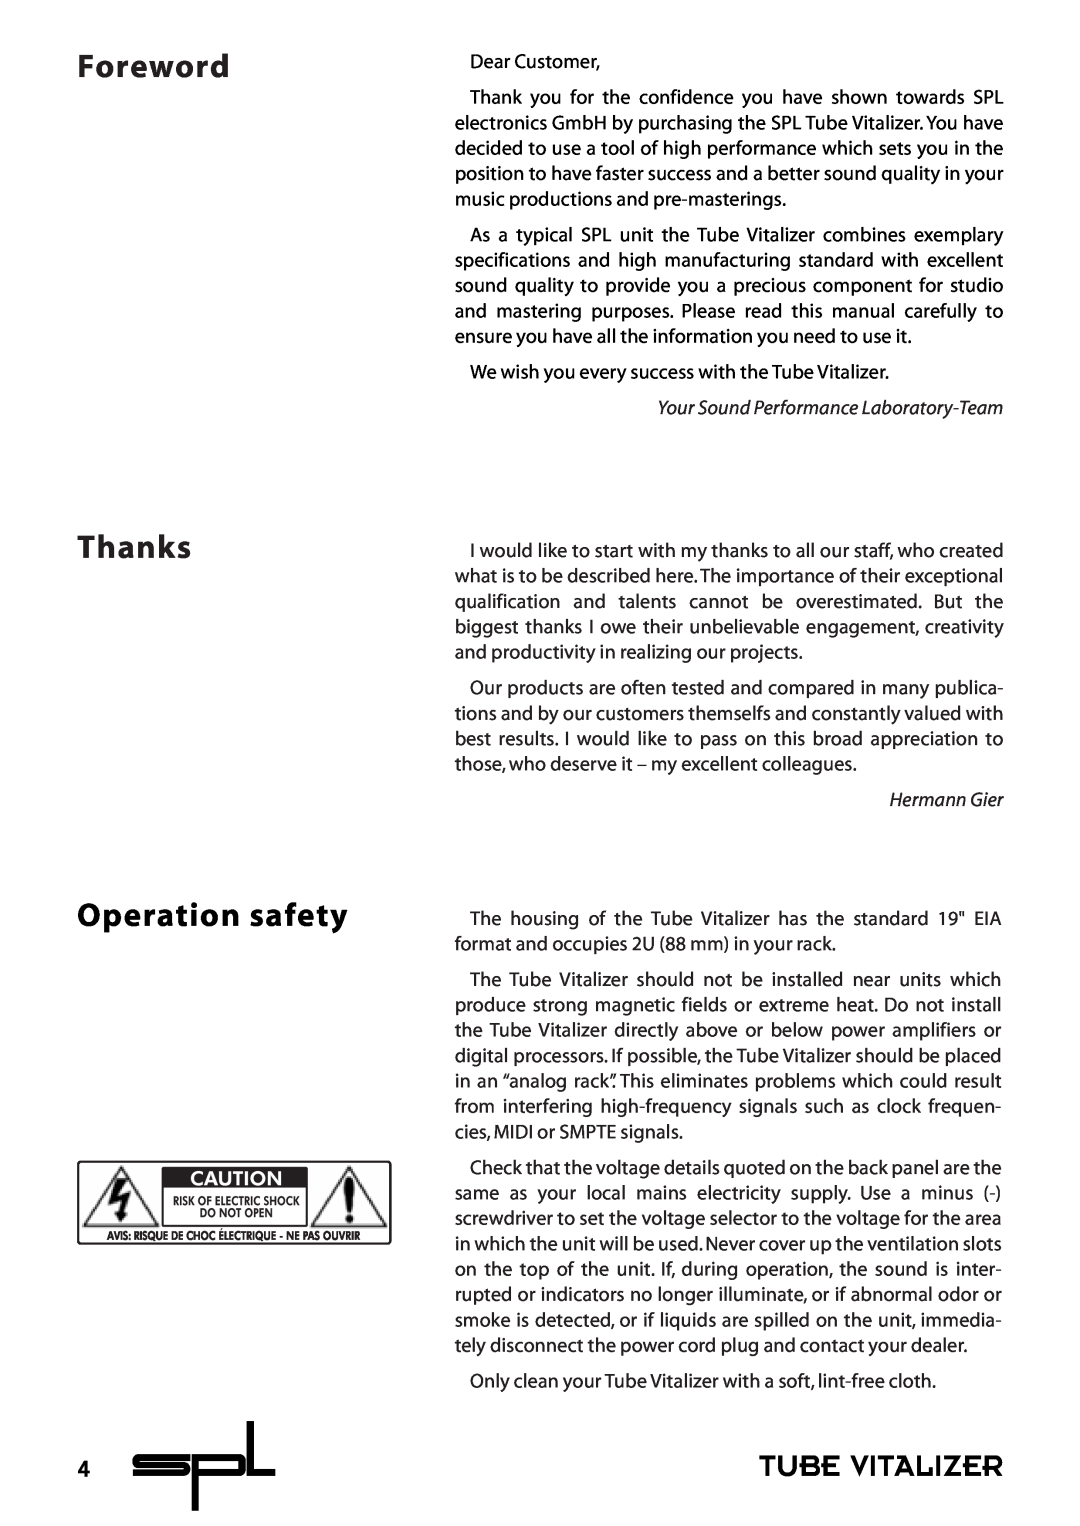 Sound Performance Lab 9530 manual Foreword Thanks Operation safety, Tube Vitalizer, Your Sound Performance Laboratory-Team 